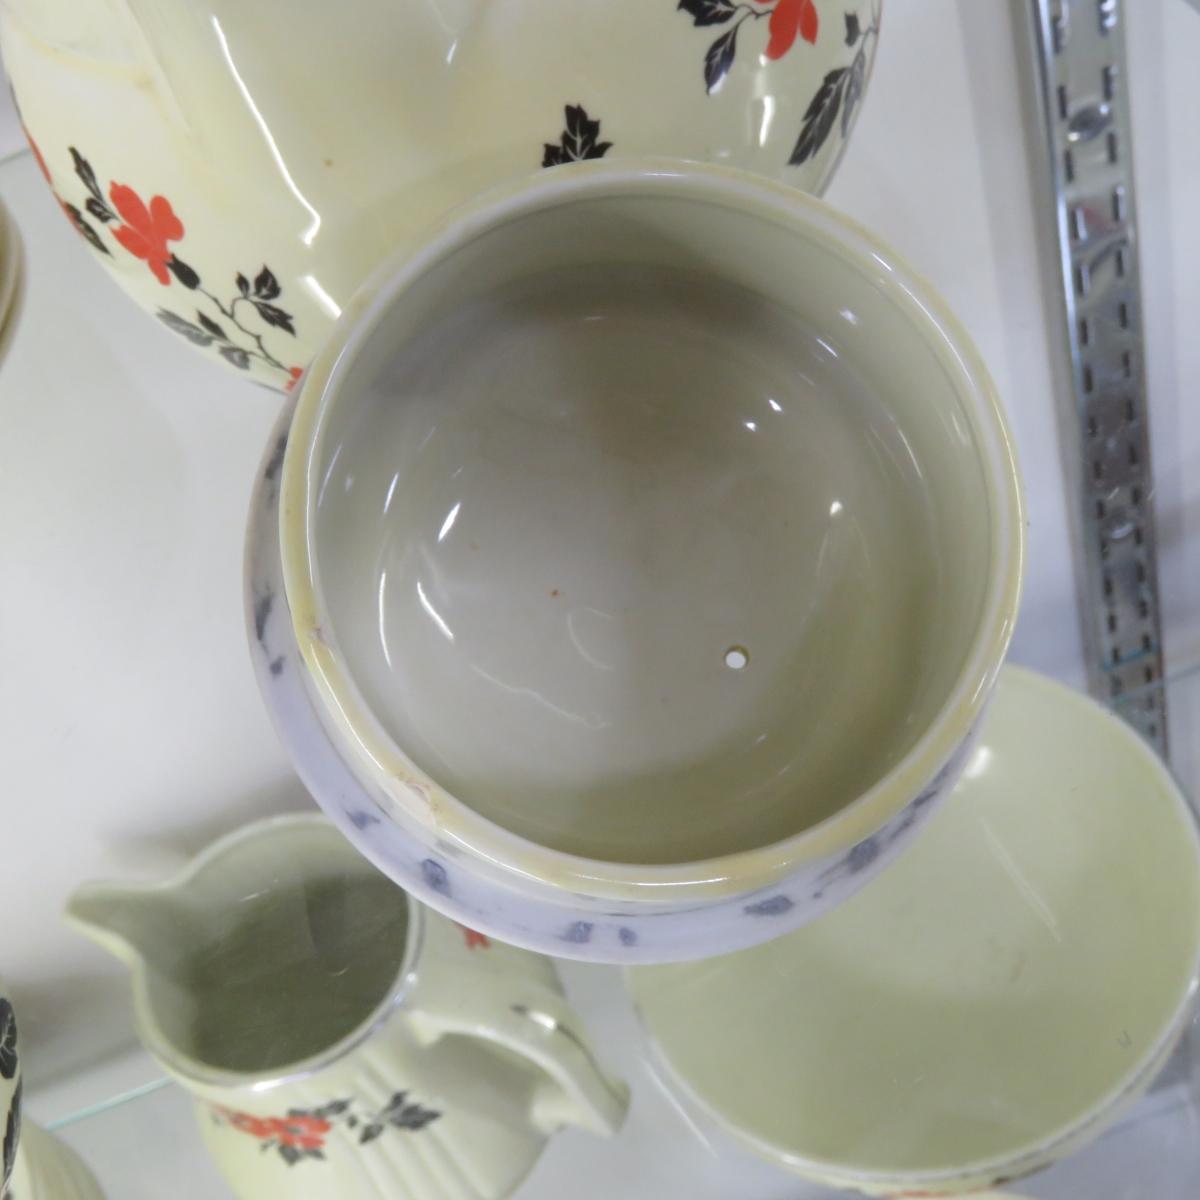 Vintage Hall's Red Poppy Coffee Service